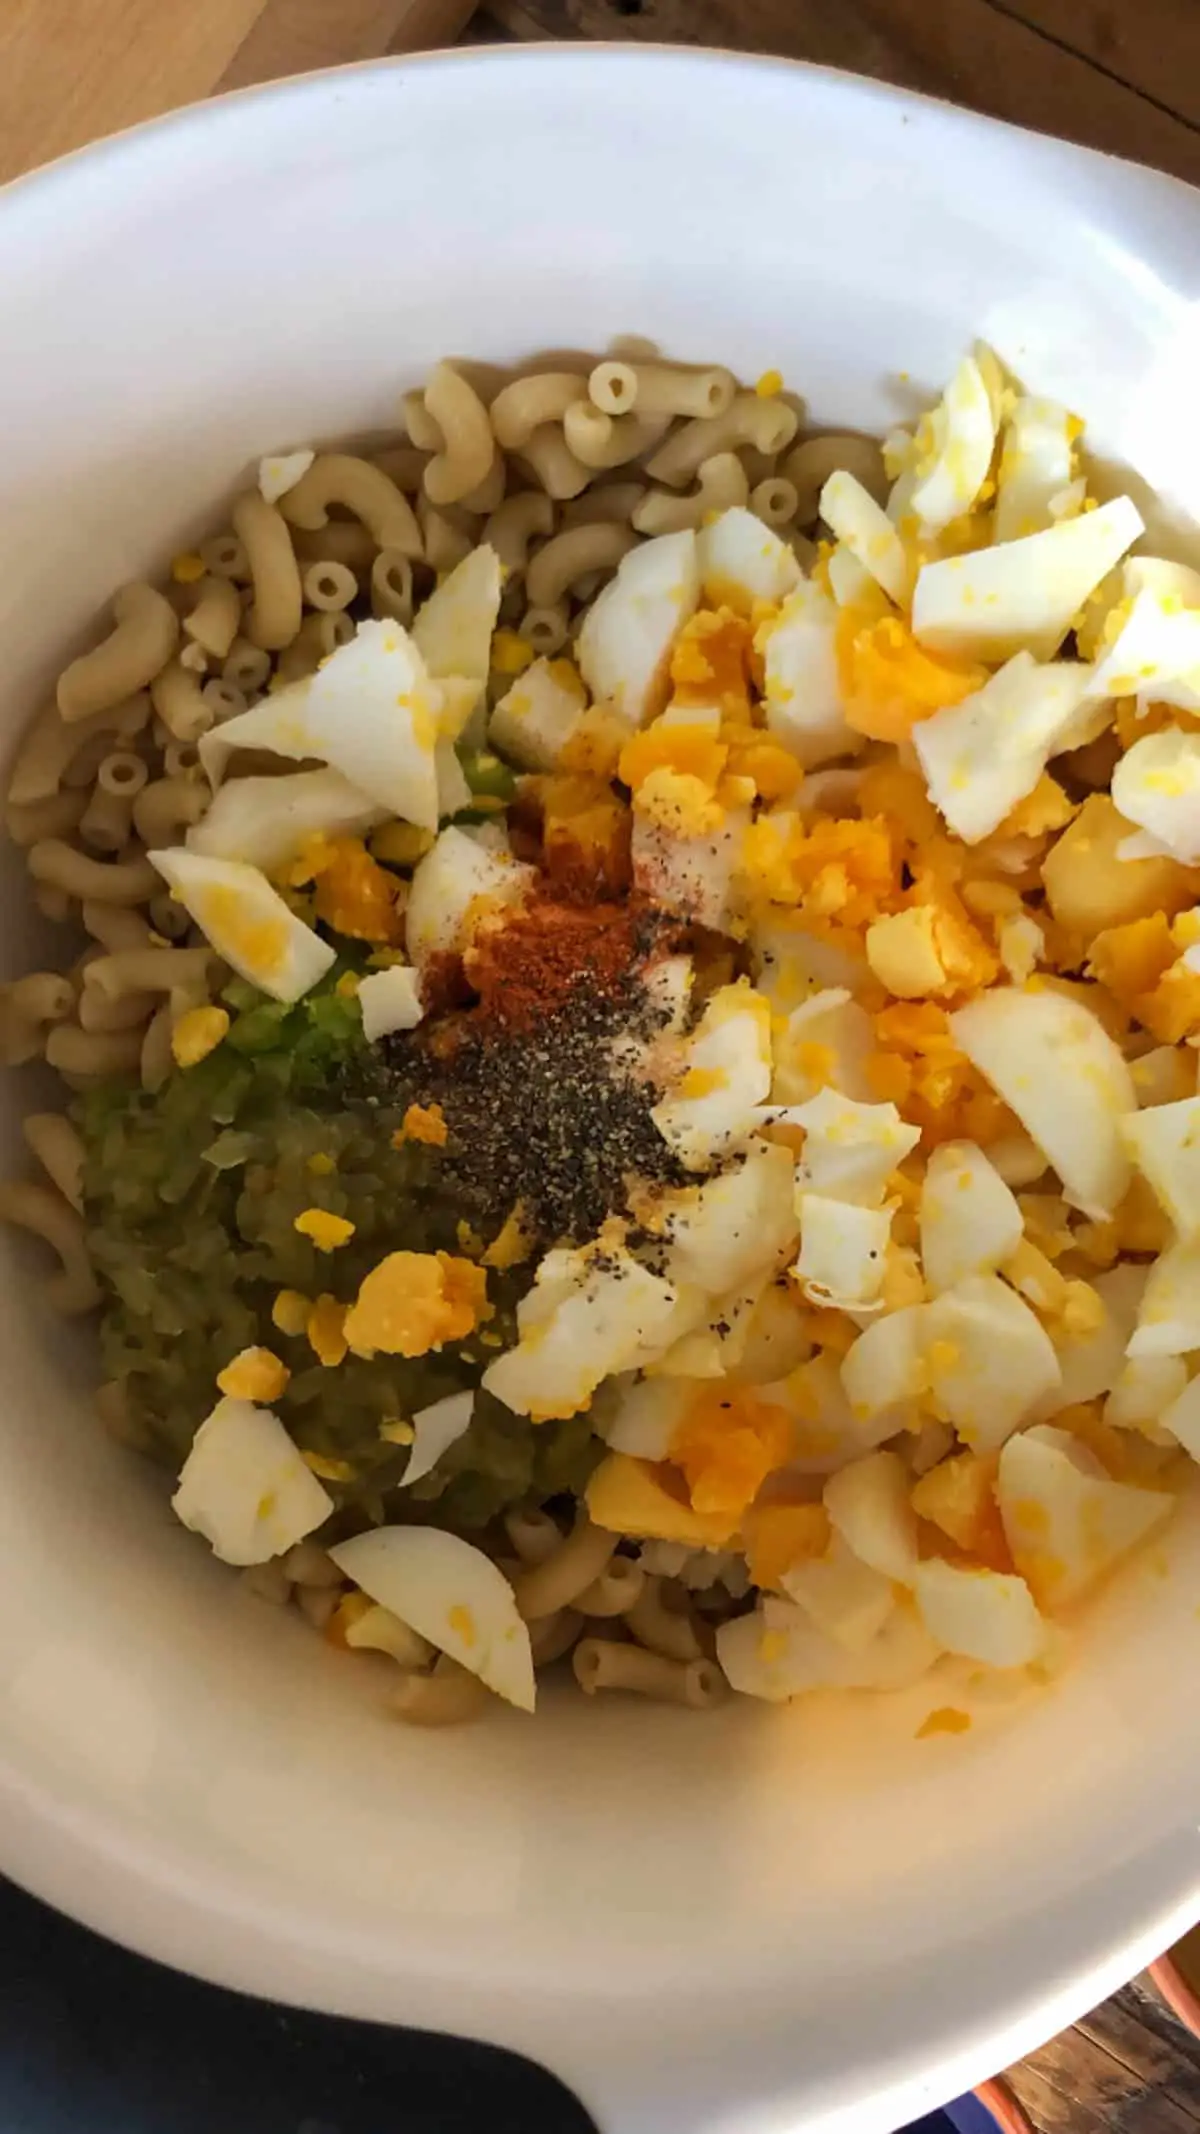 Cooked macaroni, chopped hard boiled eggs, seasonging, sweet relish and green bell pepper in a white mixing bowl.